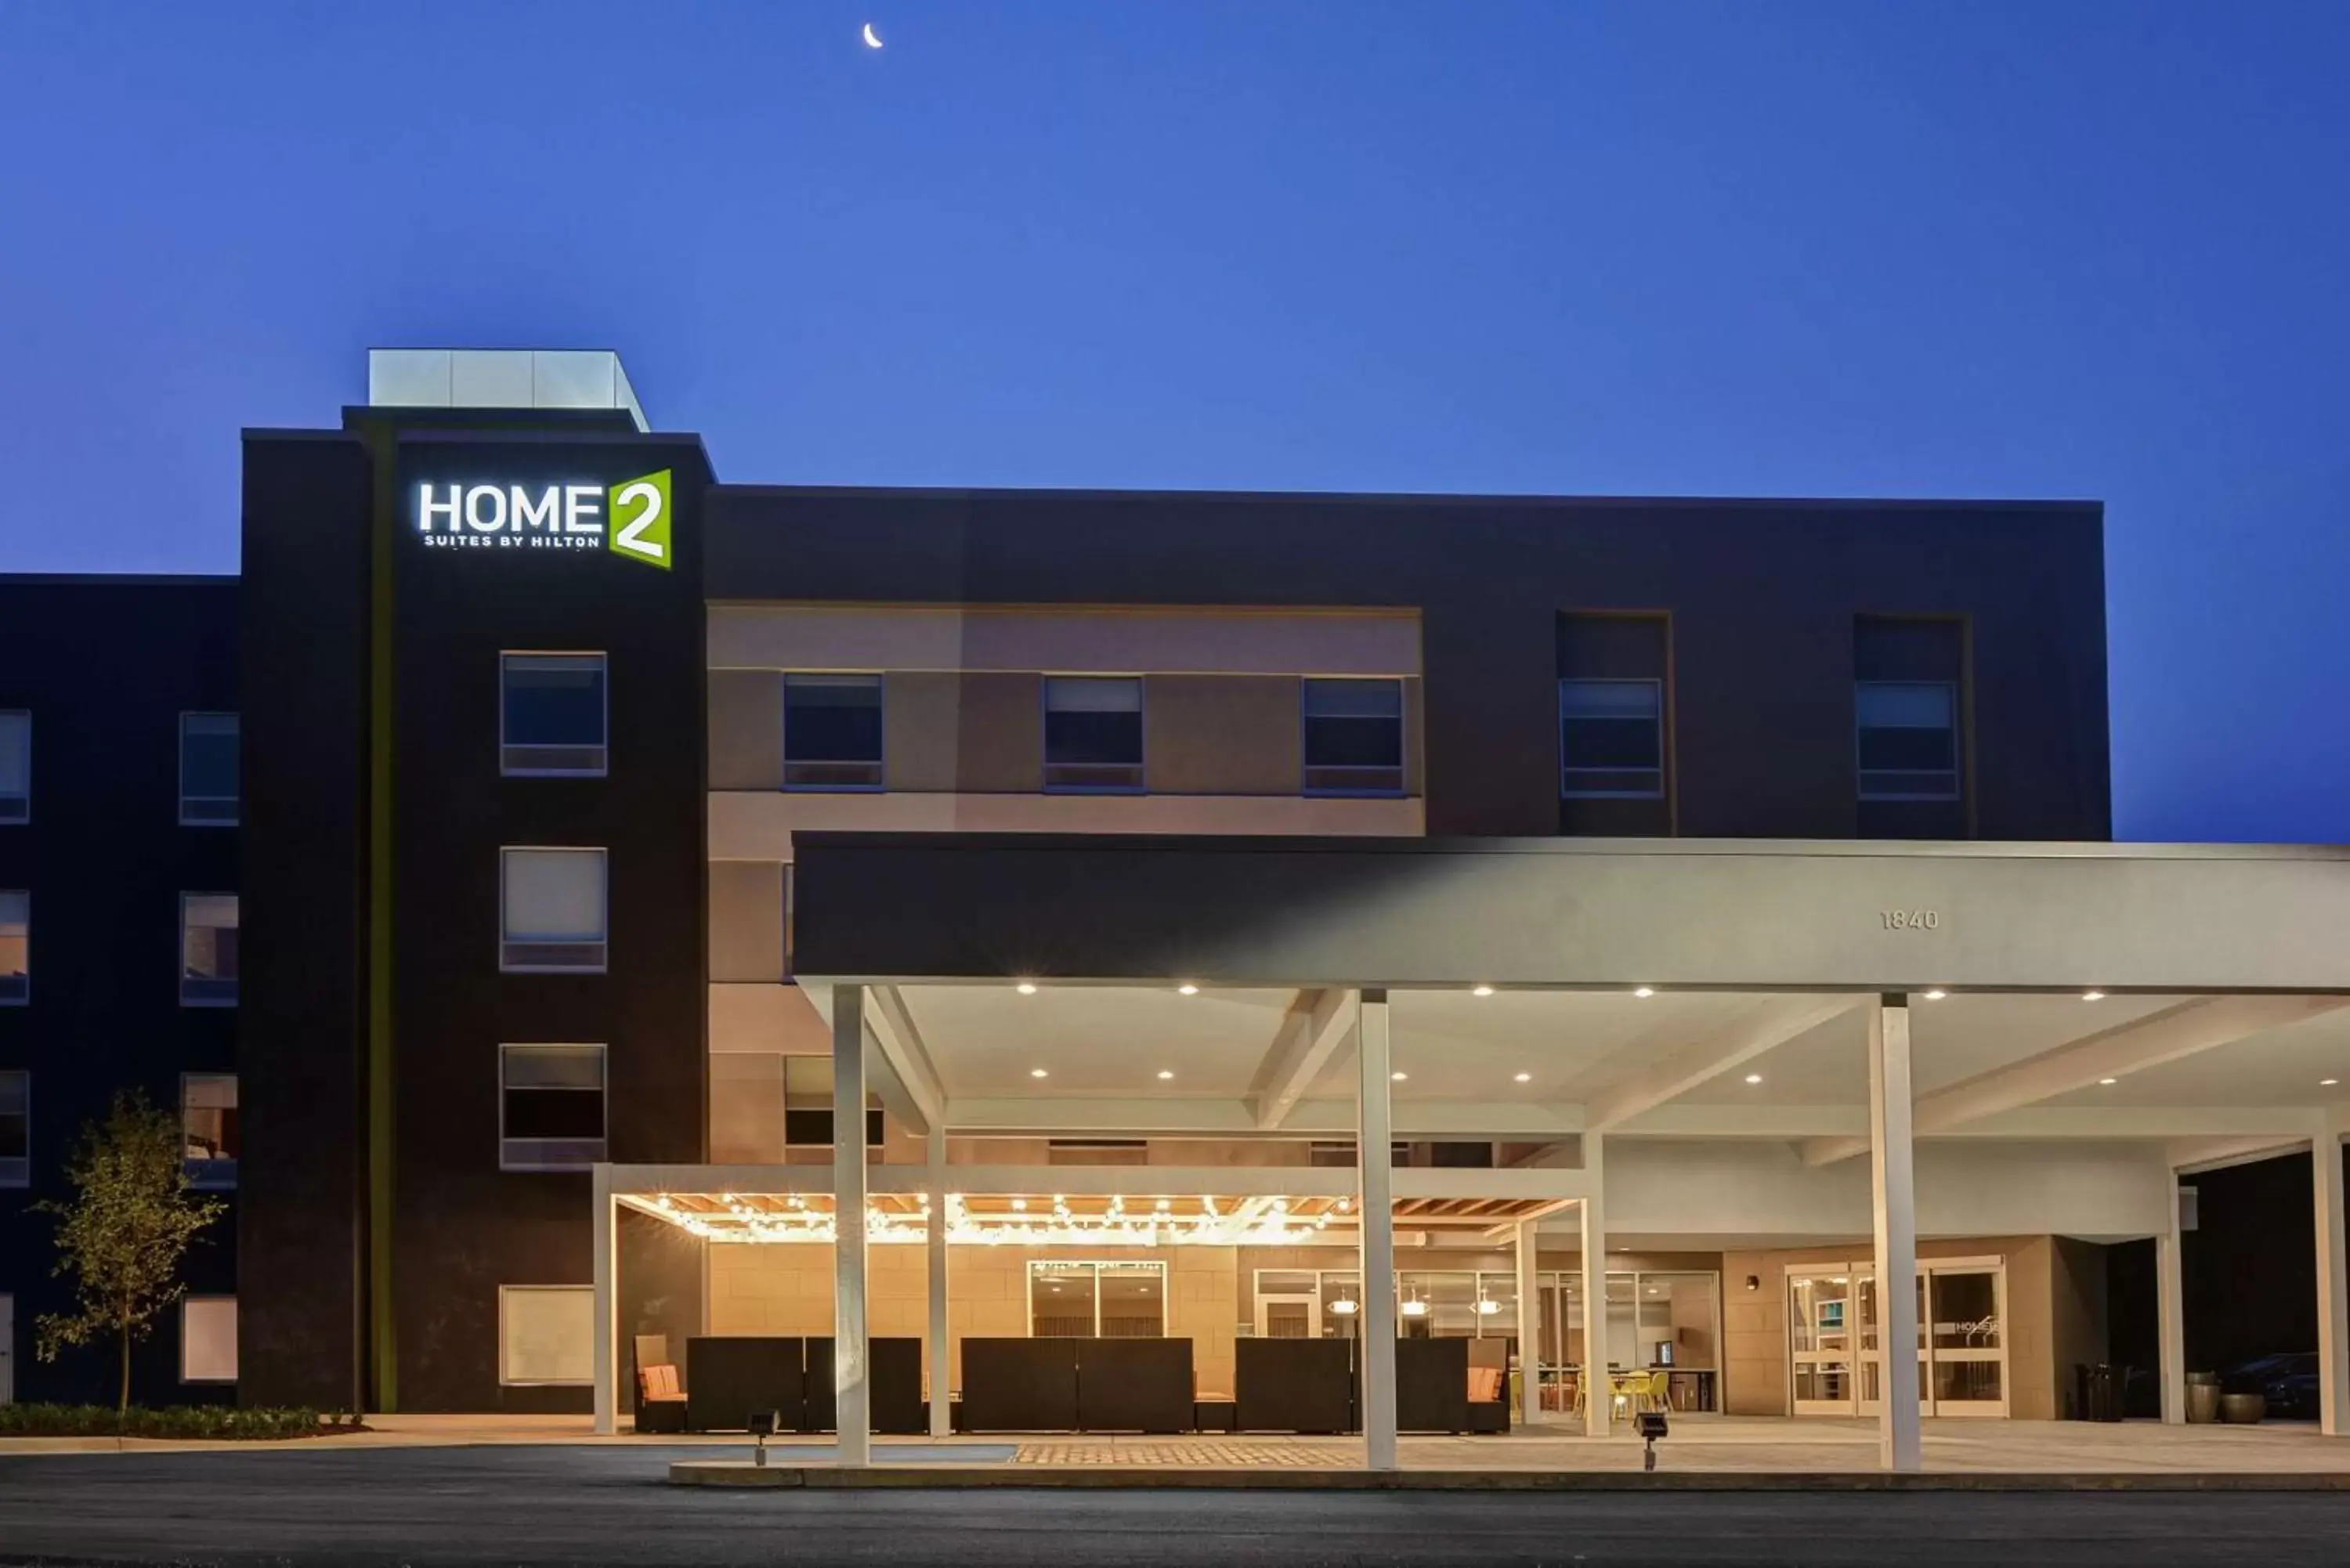 Property Building in Home2 Suites By Hilton Fort Mill, Sc